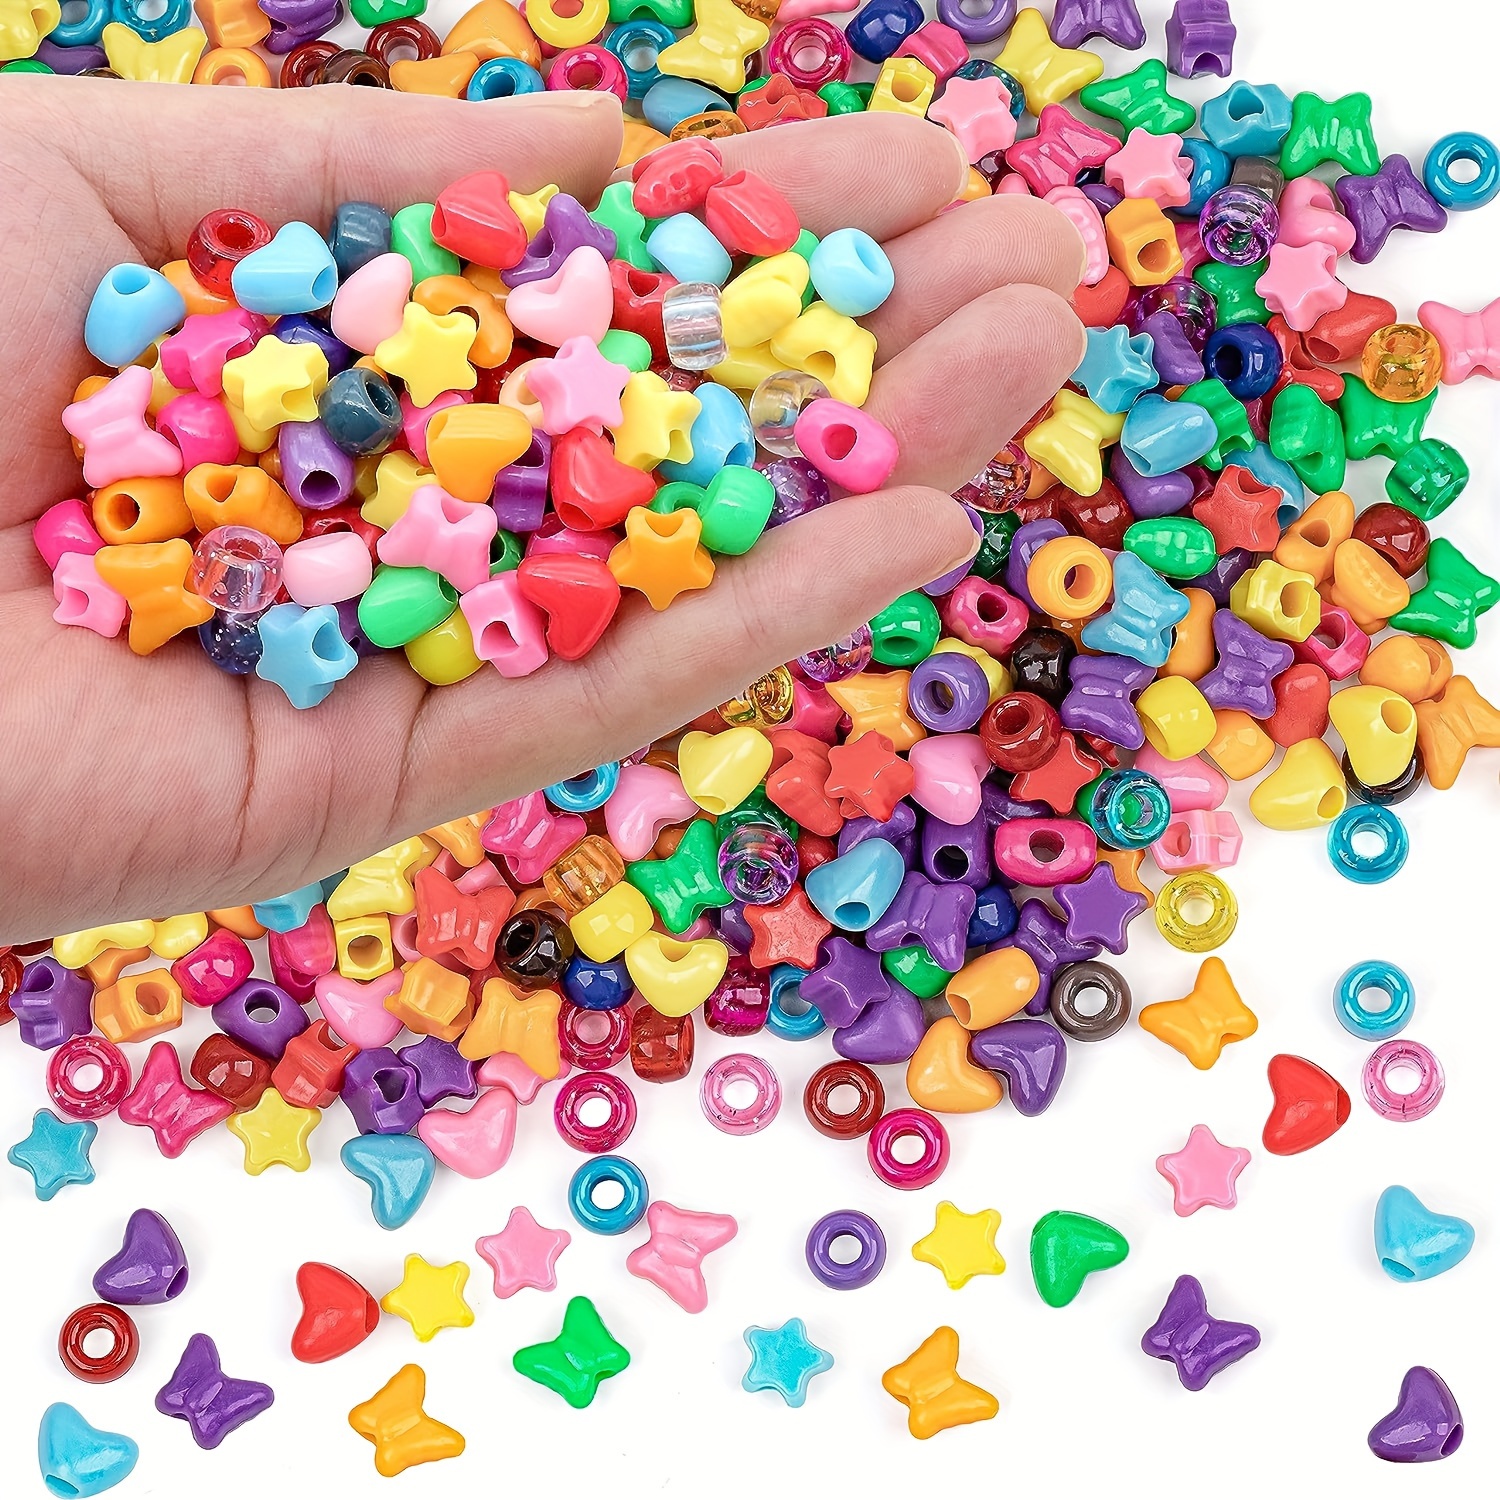 

300pcs Multi-colored Plastic Rainbow Pony Beads Mixed Type Perforated Bulk Hair Beads For Jewelry Making Diy Face Mask Decors, Bracelet Necklace Crafts Small Business Supplies